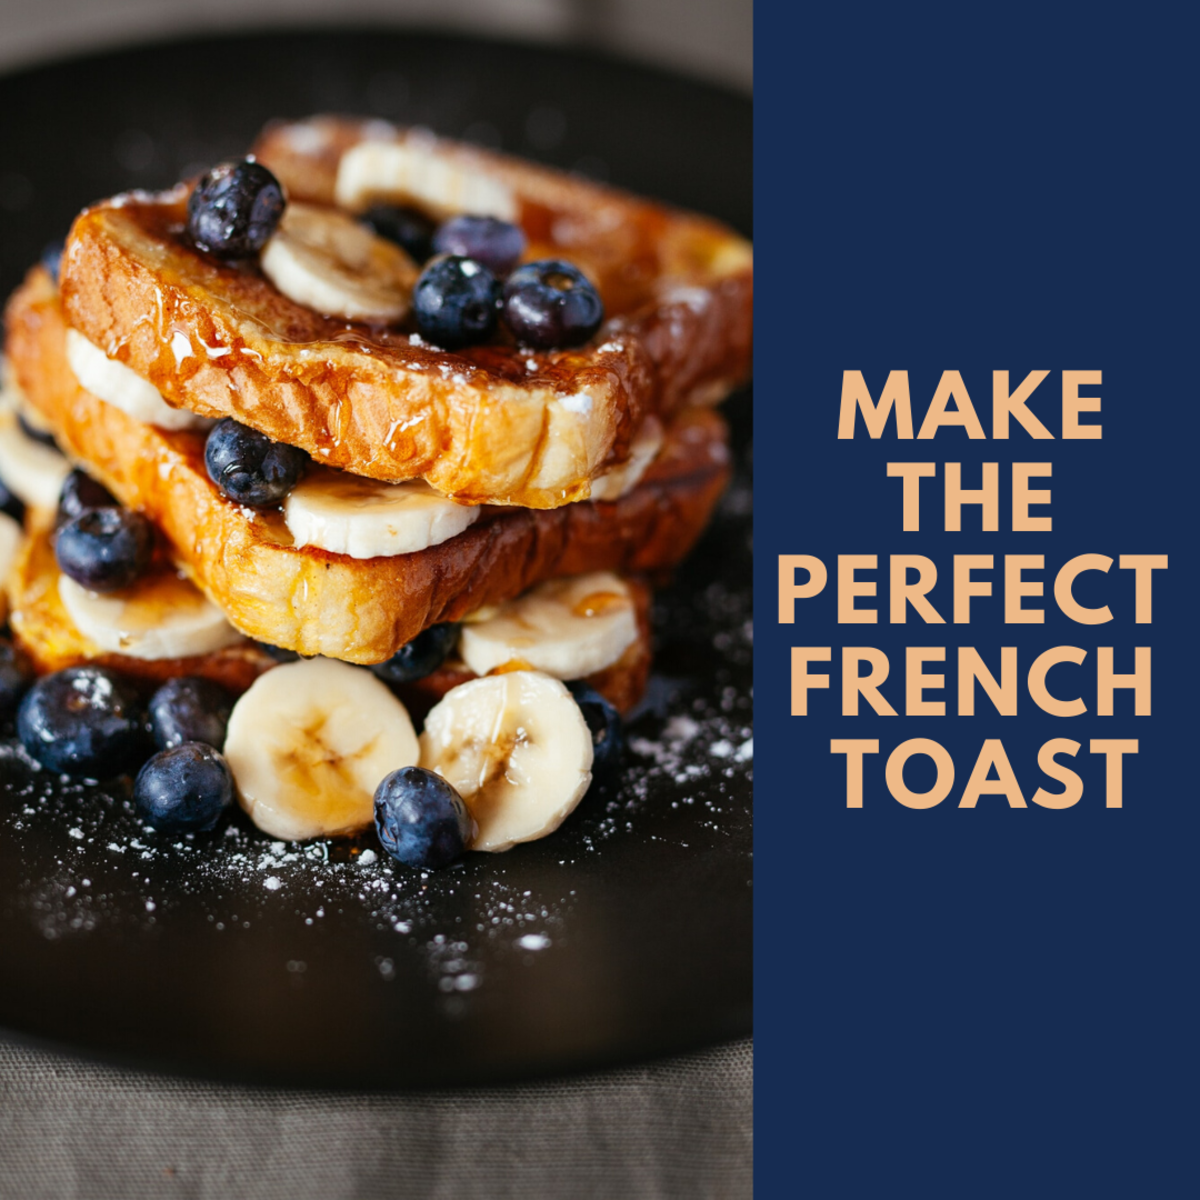 How to Make the Perfect French Toast